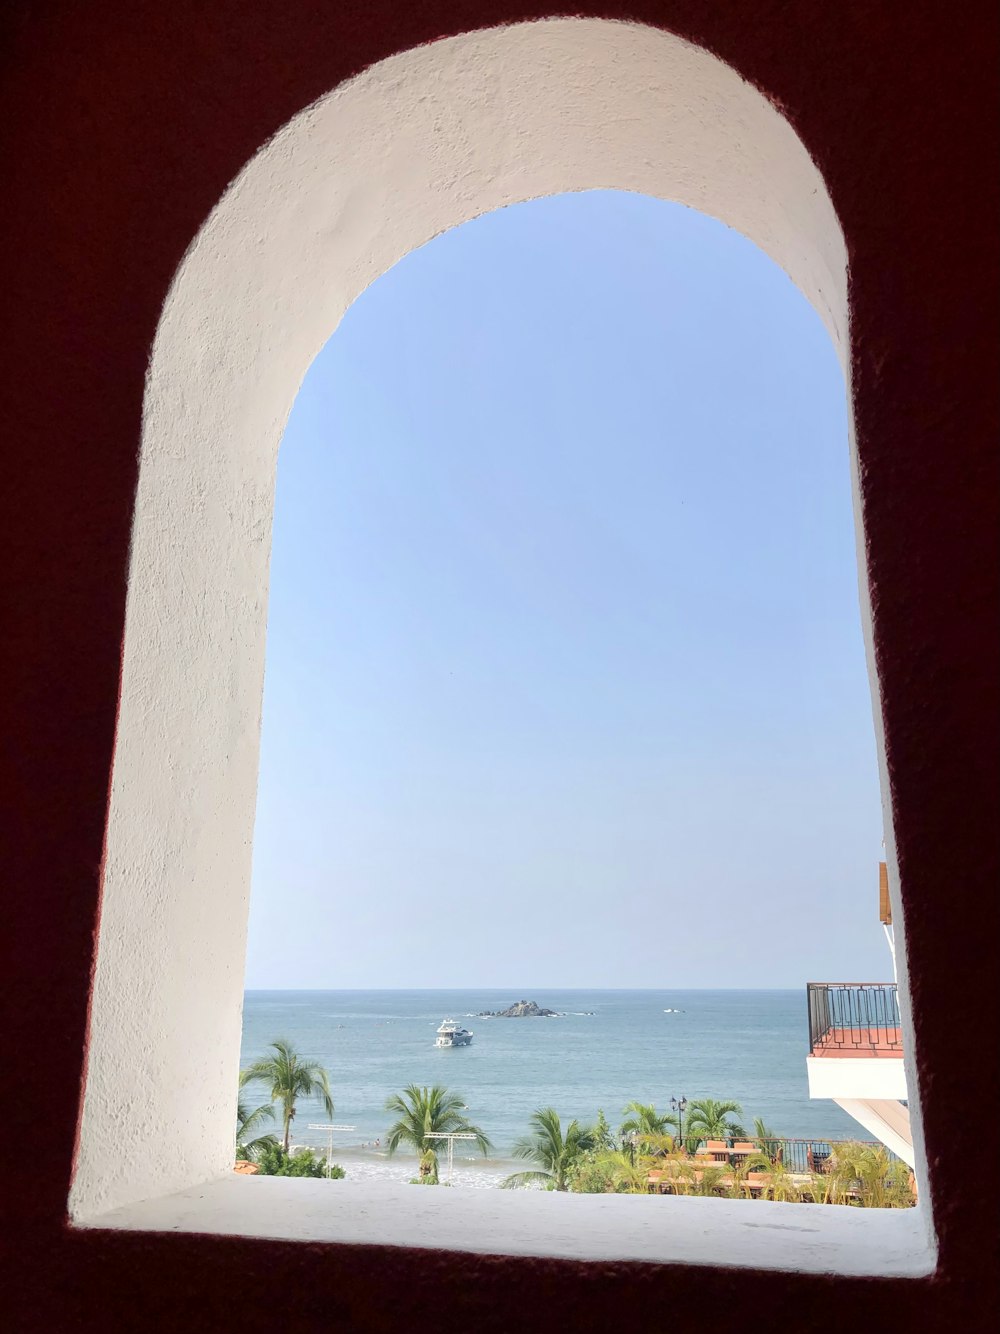 a view of the ocean from a window in a building